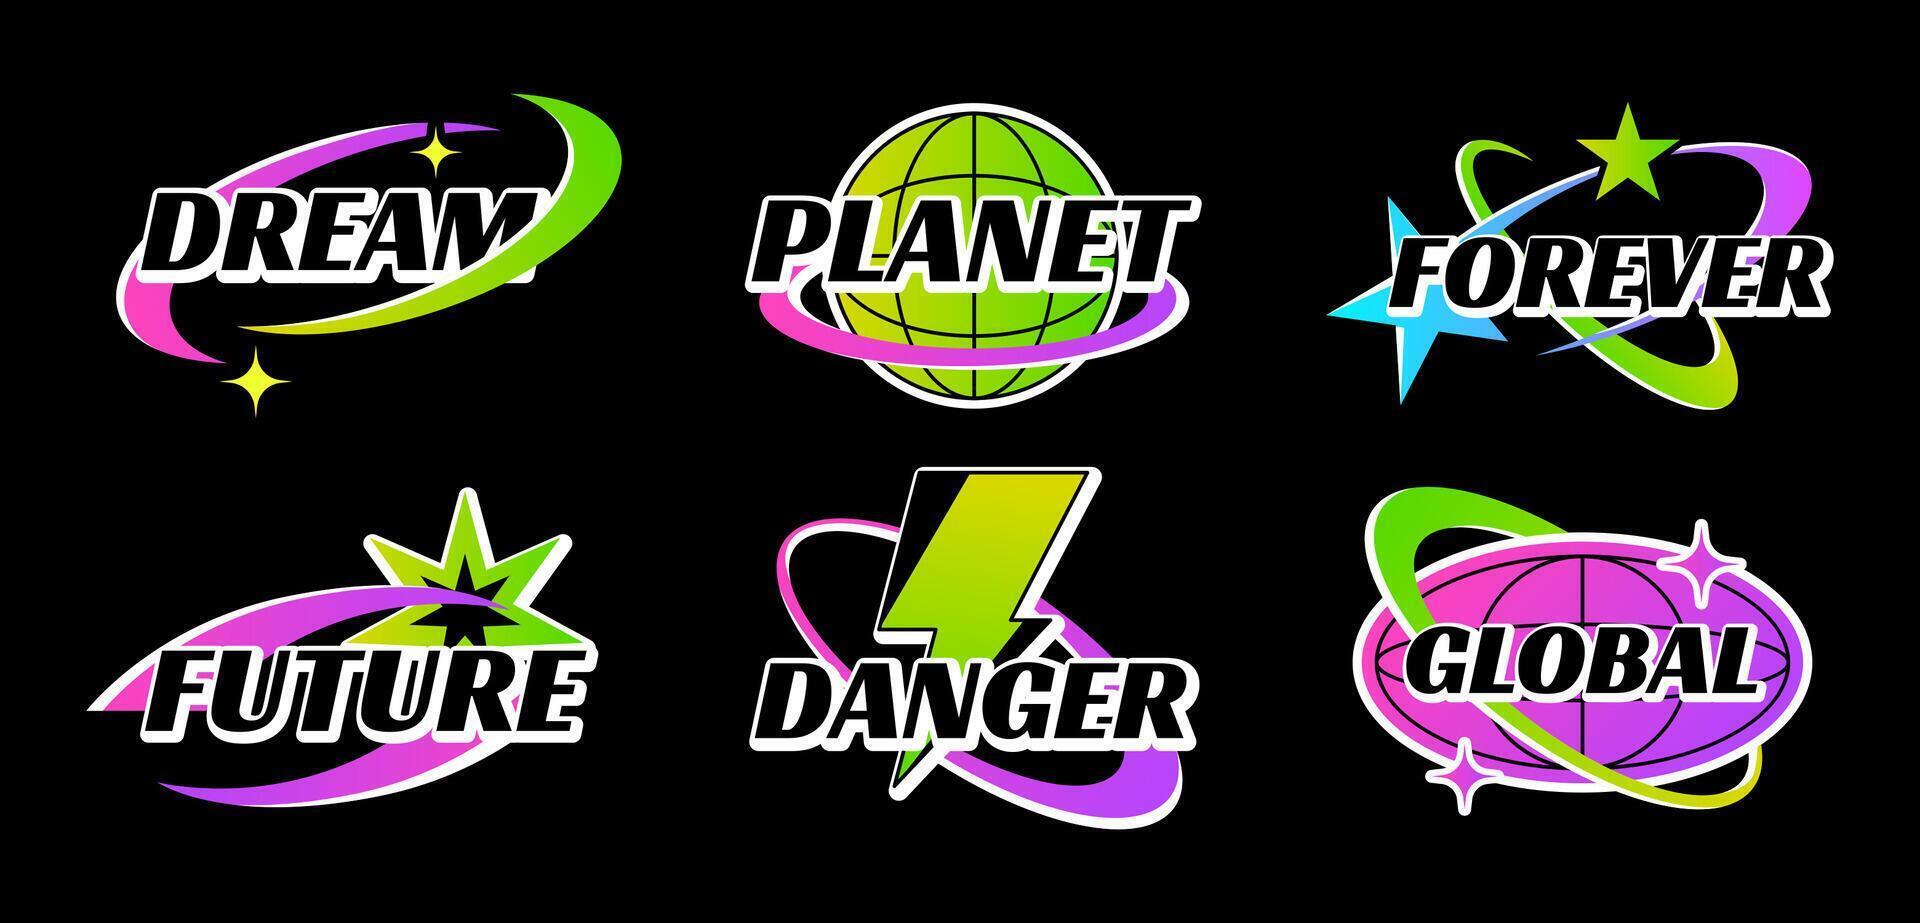 Retro Y2K logo set. Acid gradient color stickers with lettering logos for shirt. Badges, slogan typography vector icon design with star, planet earth. Futuristic elements isolated on black background